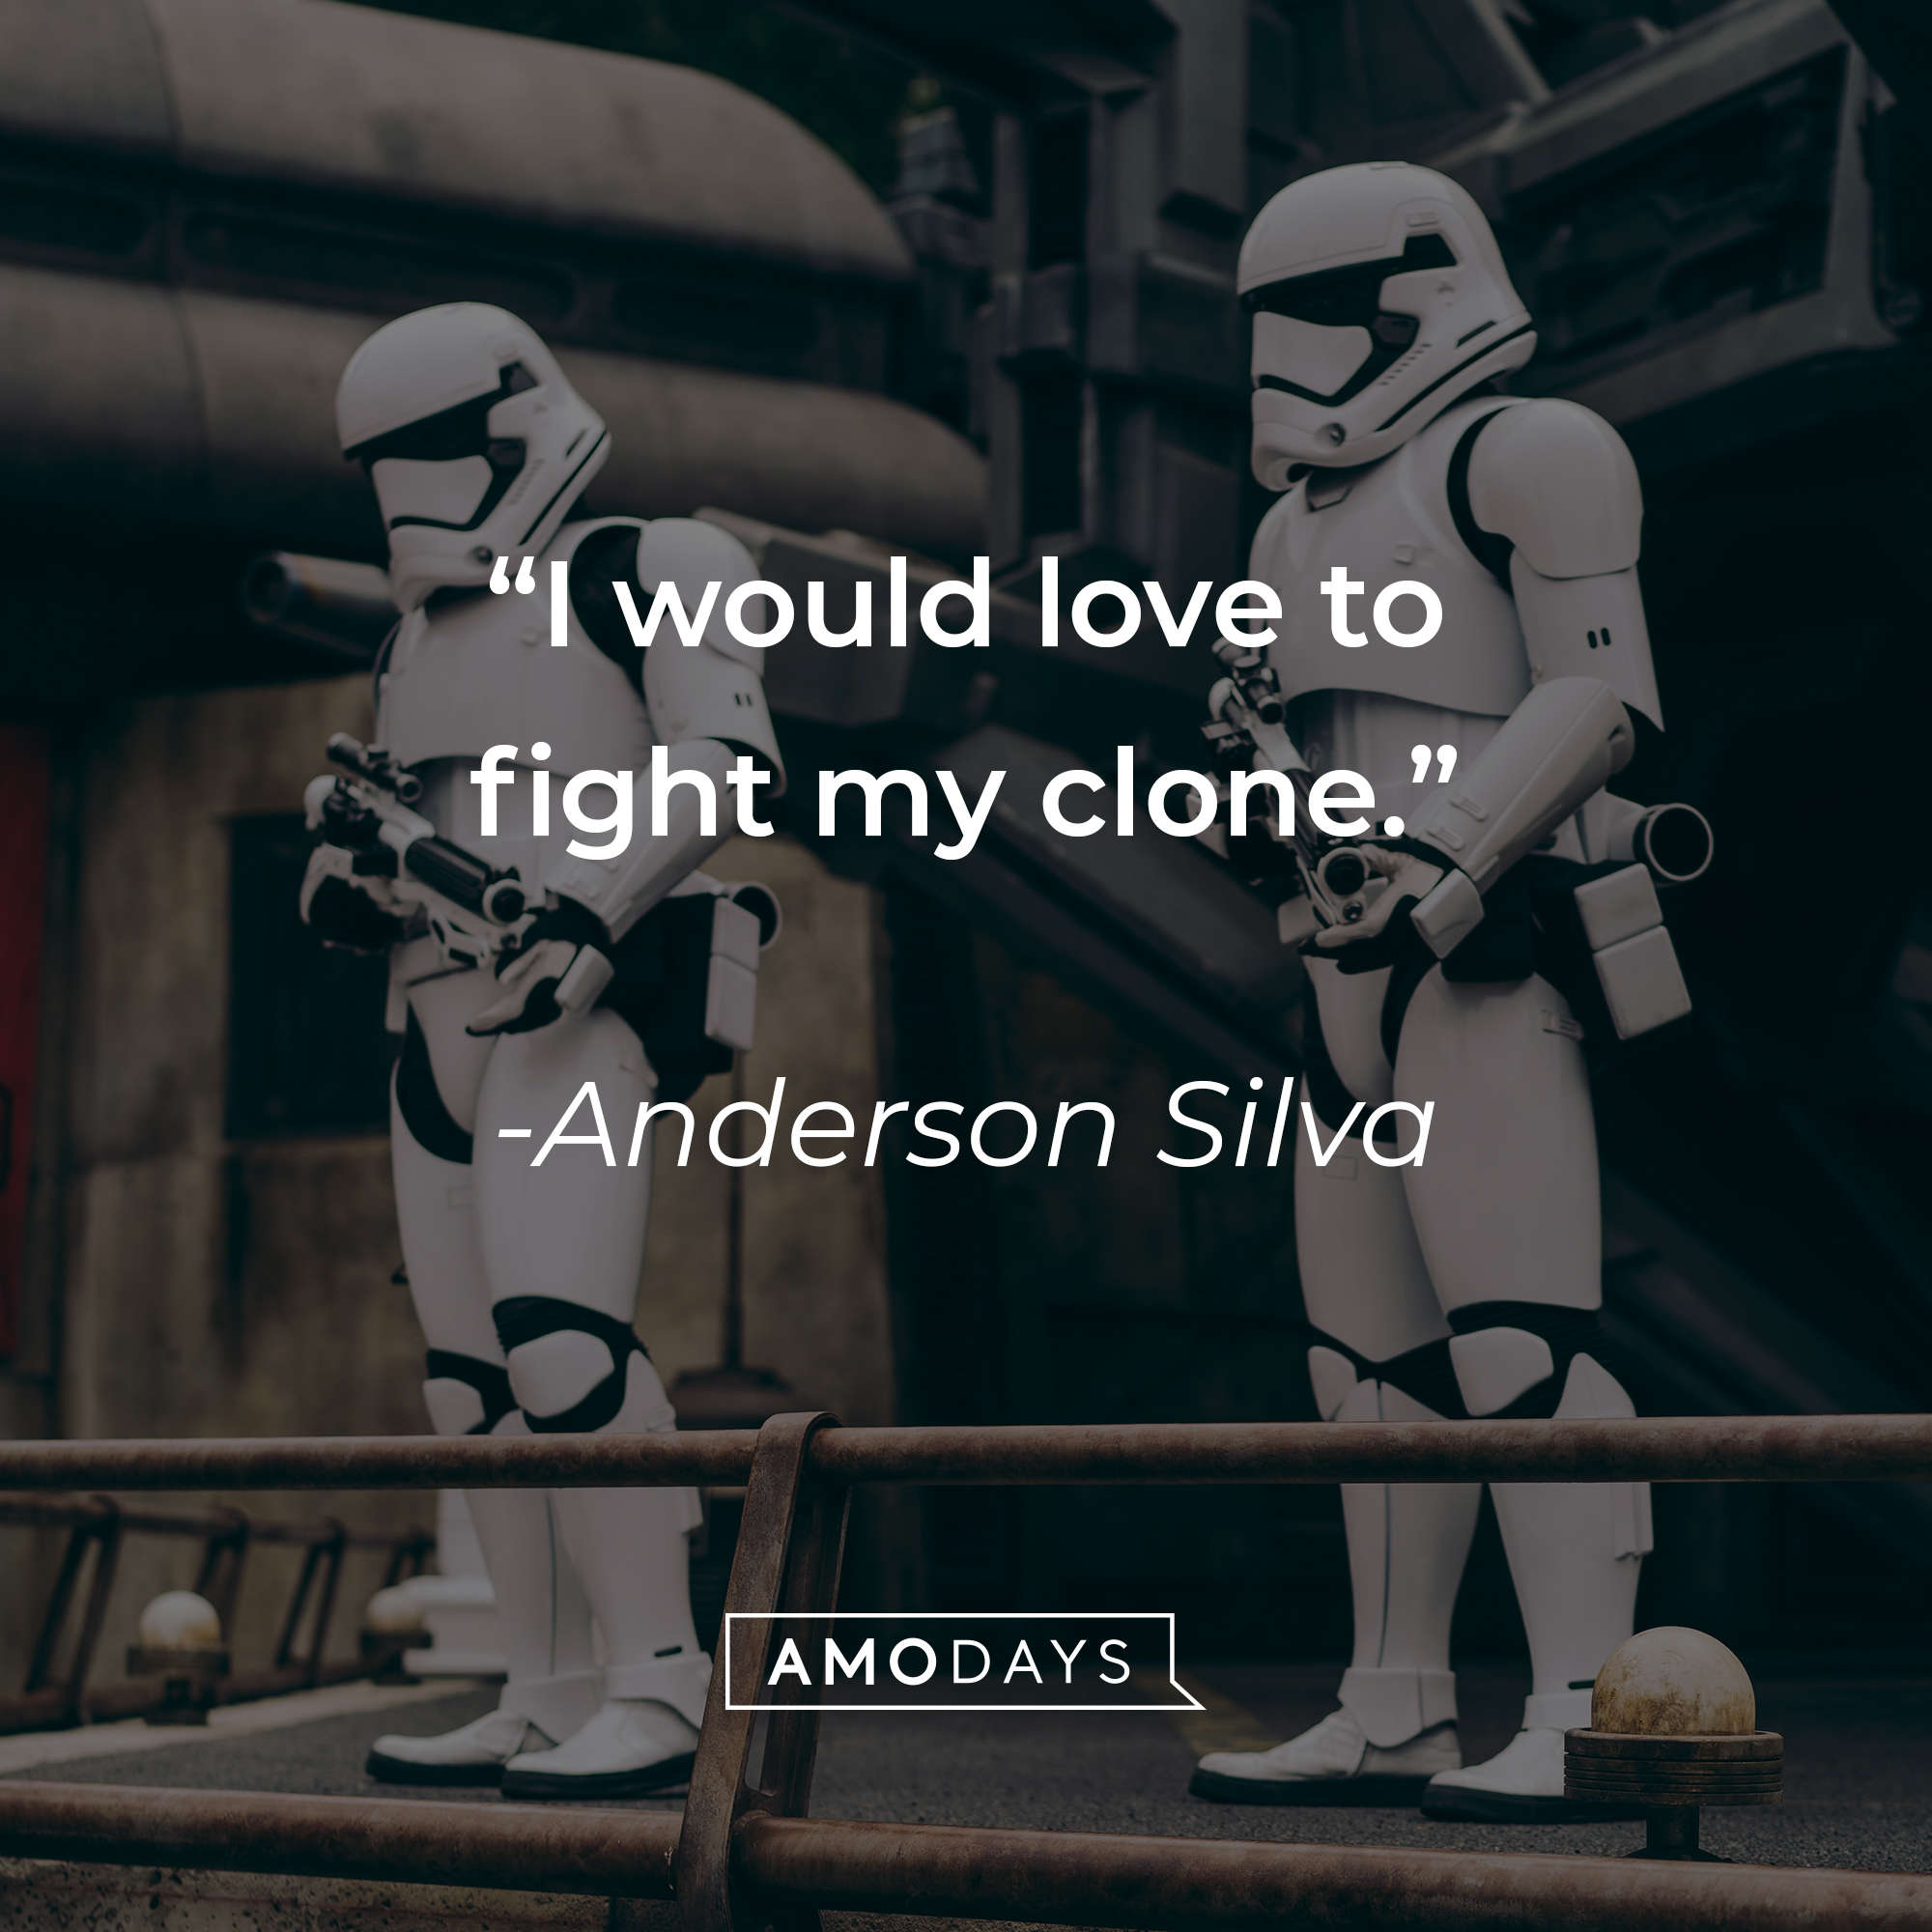 Anderson Silva's quote, "I would love to fight my clone." | Image: Unsplash.com